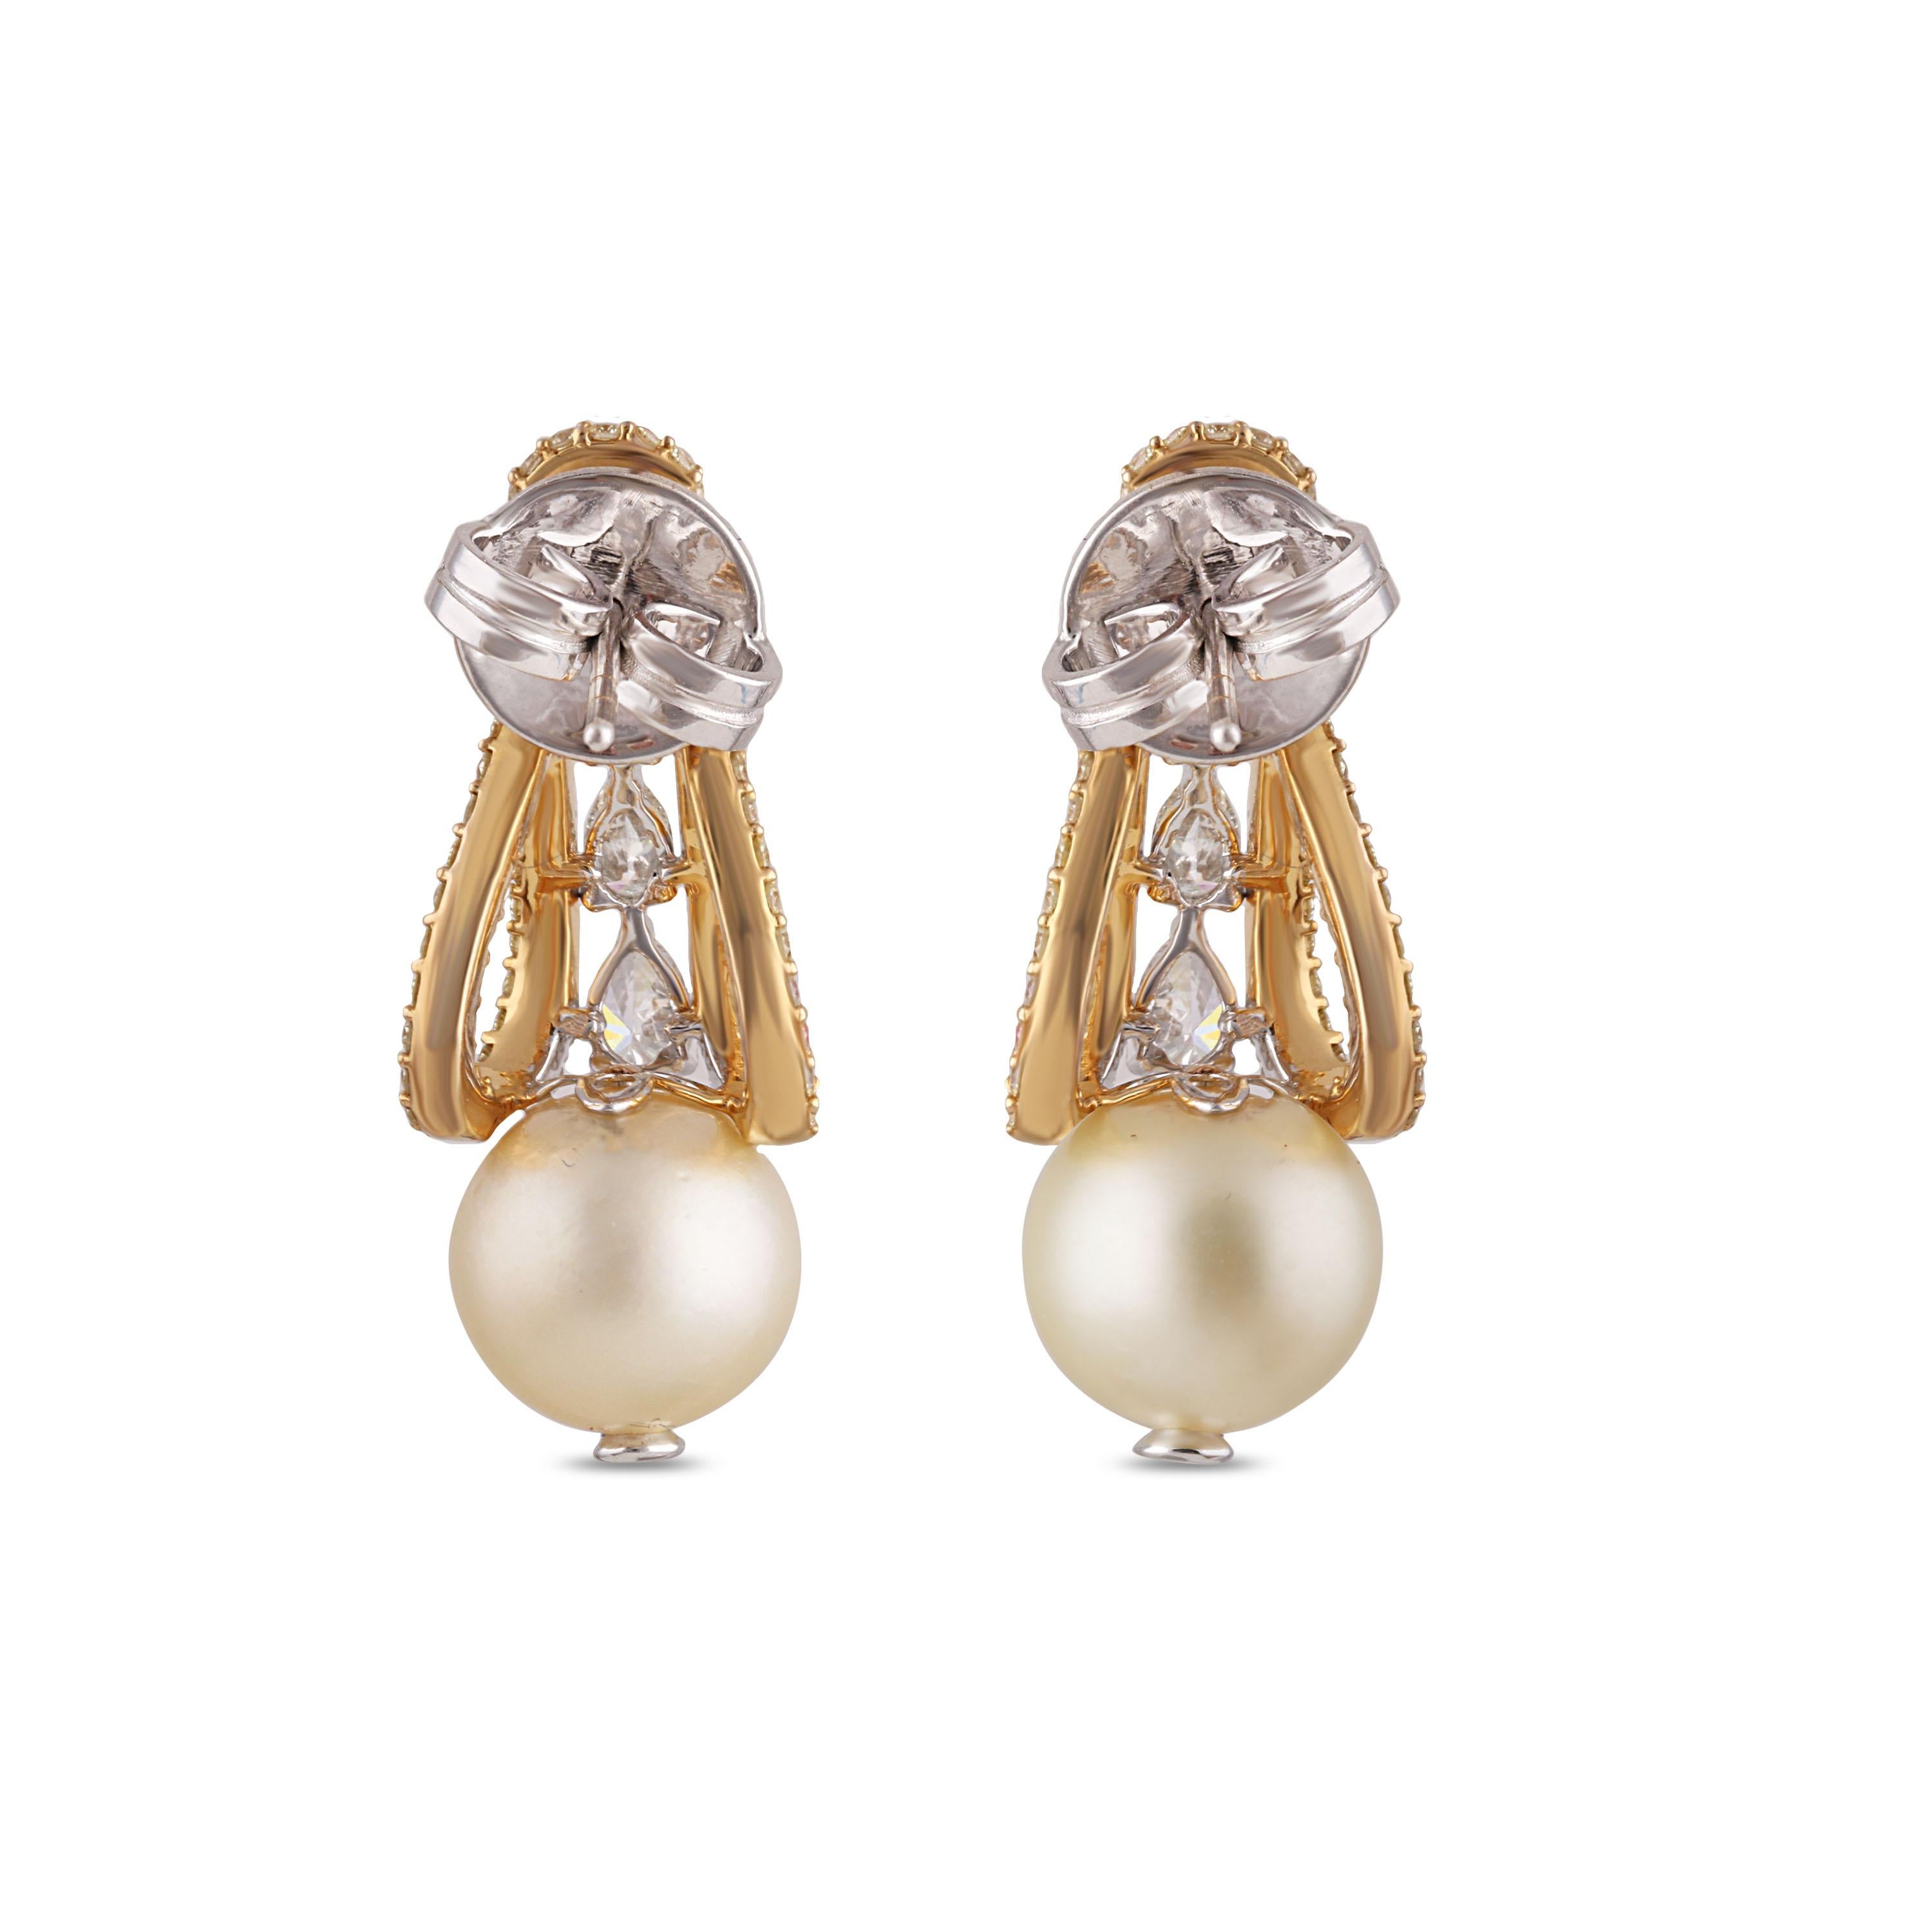 Studio Rêves Ribbon Fold Diamond and South Sea Pearls Stud Earrings in 18K Gold For Sale 2